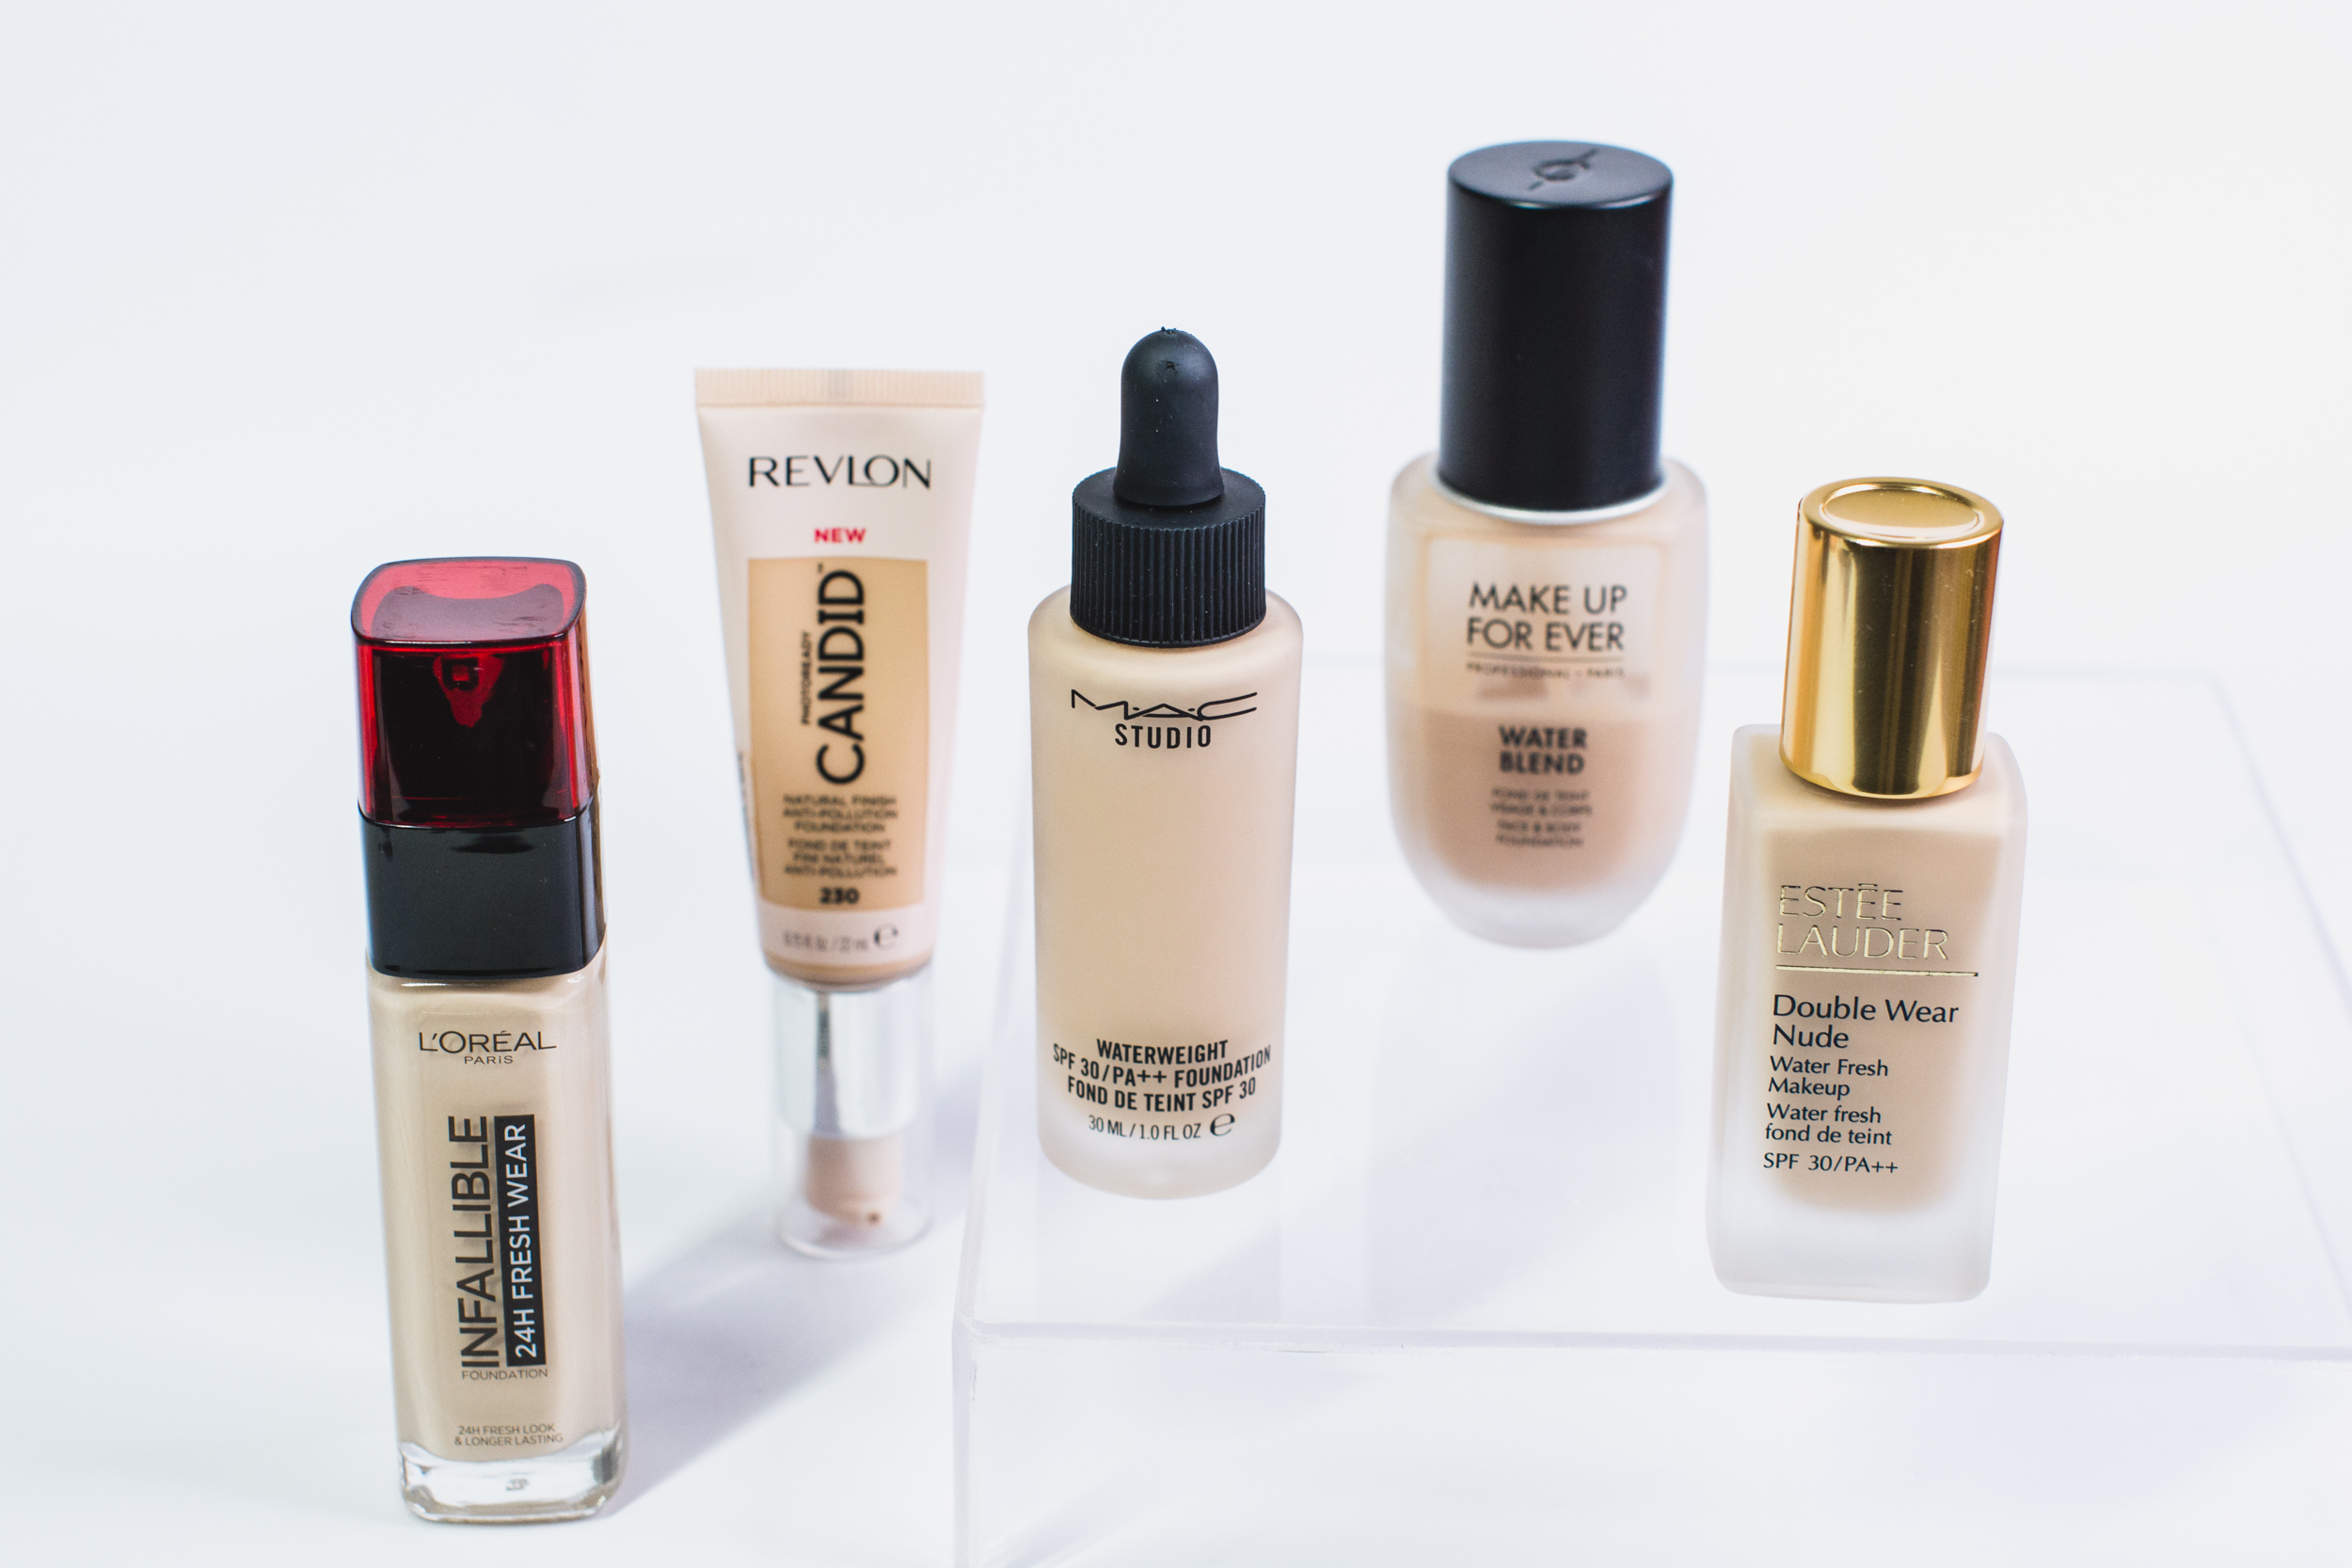 L'Oreal Paris Infallible Up To 24 HR Fresh Wear Liquid Foundation YOU  CHOOSE